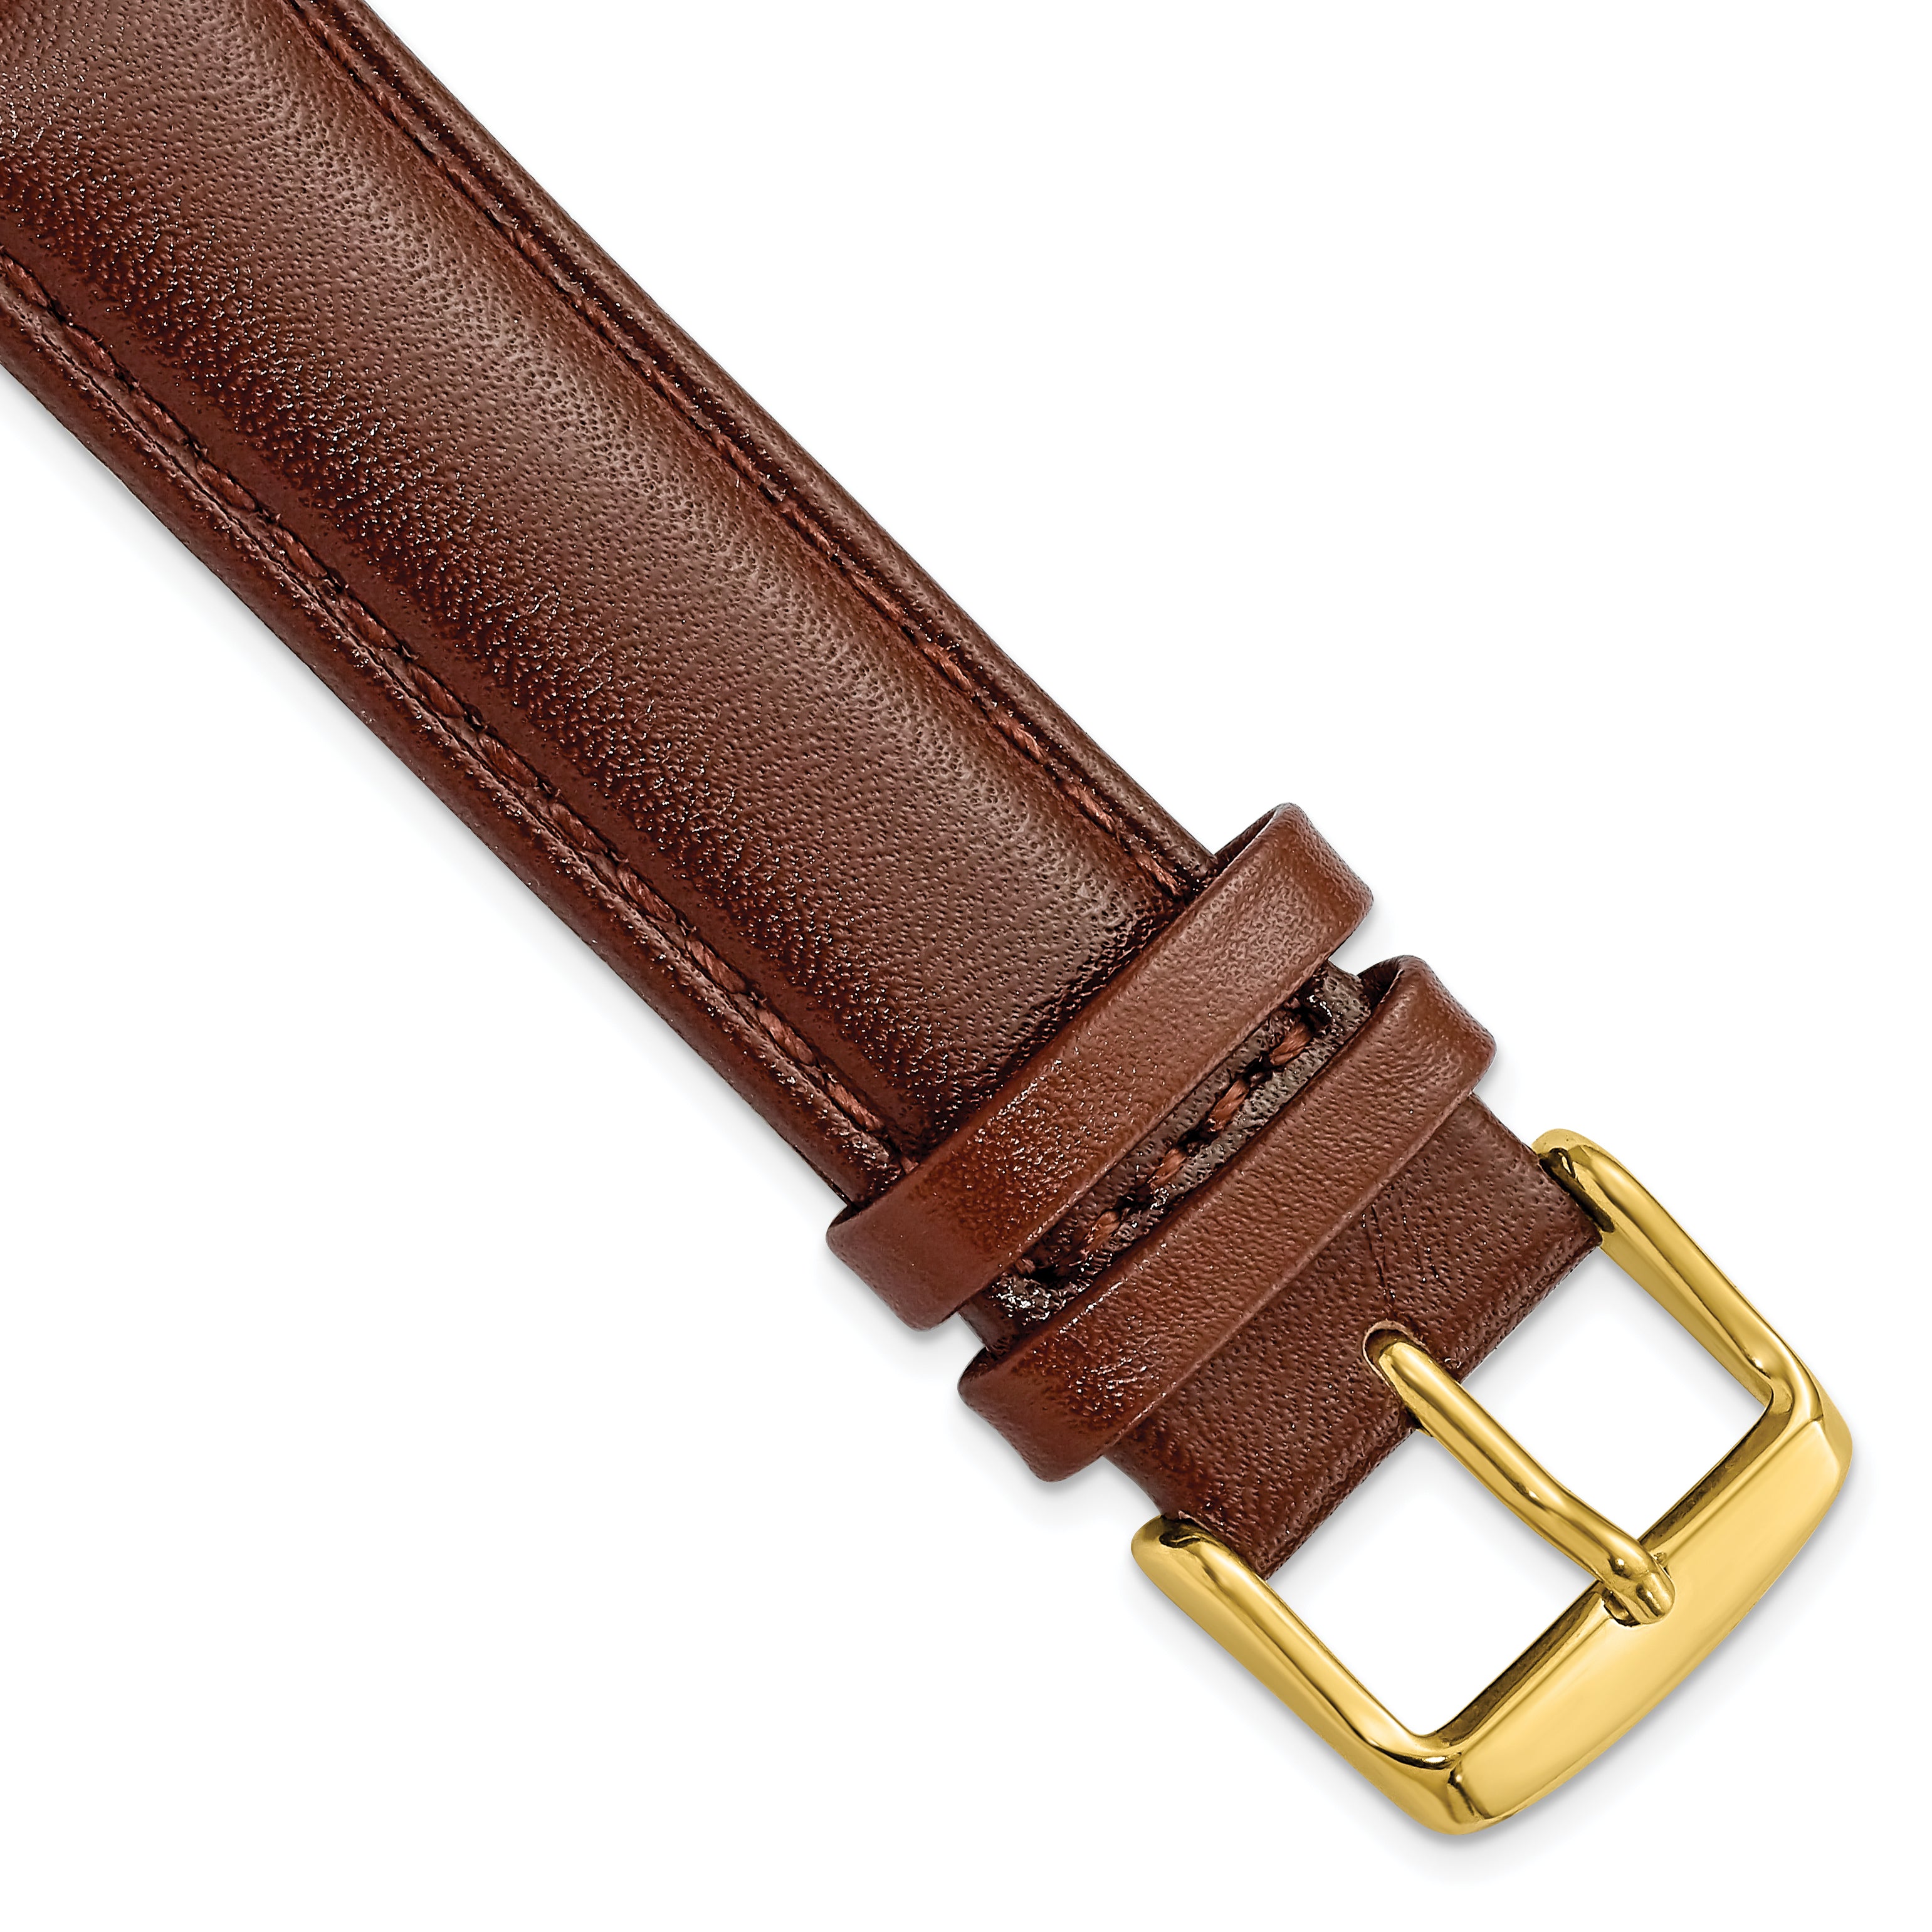 DeBeer 19mm Havana Smooth Leather Chronograph with Gold-tone Buckle 7.5 inch Watch Band